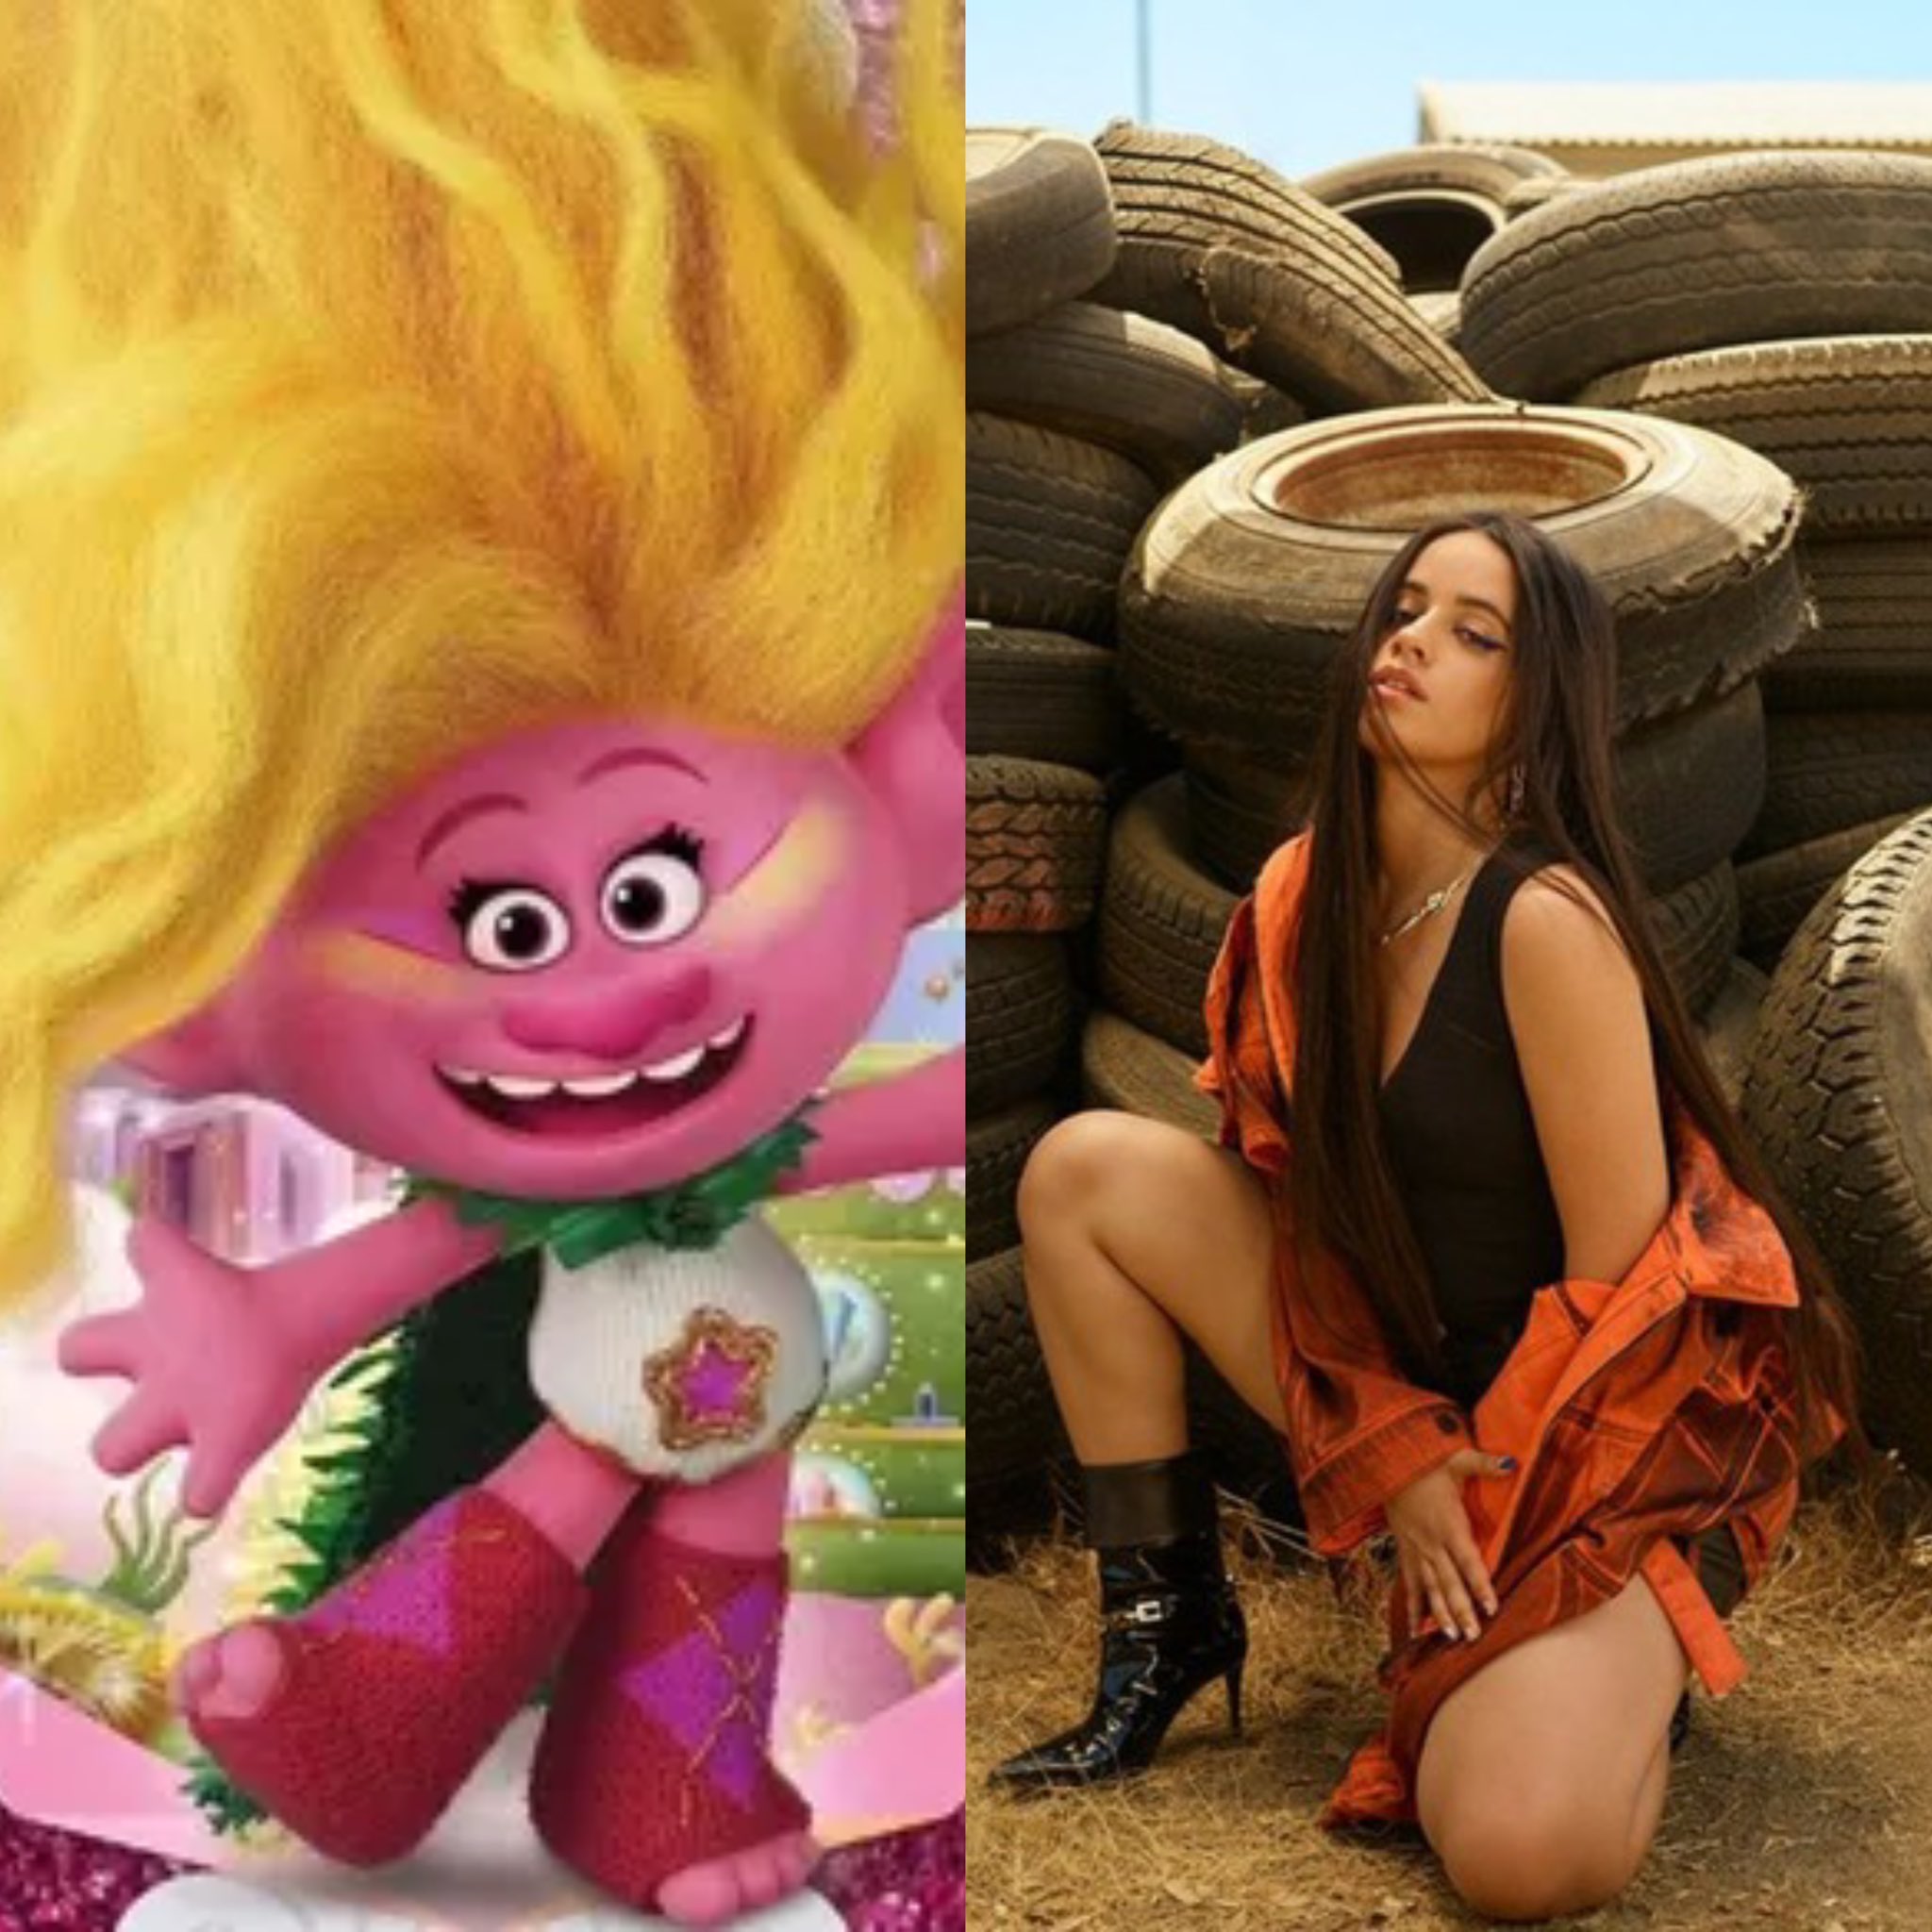 Camila Cabello Central on X: Trolls: Band Together starring Camila  Cabello, Anna Kendrick and Justin Timberlake remains in the top 5 of UK Box  Office at #2 after one week after release.